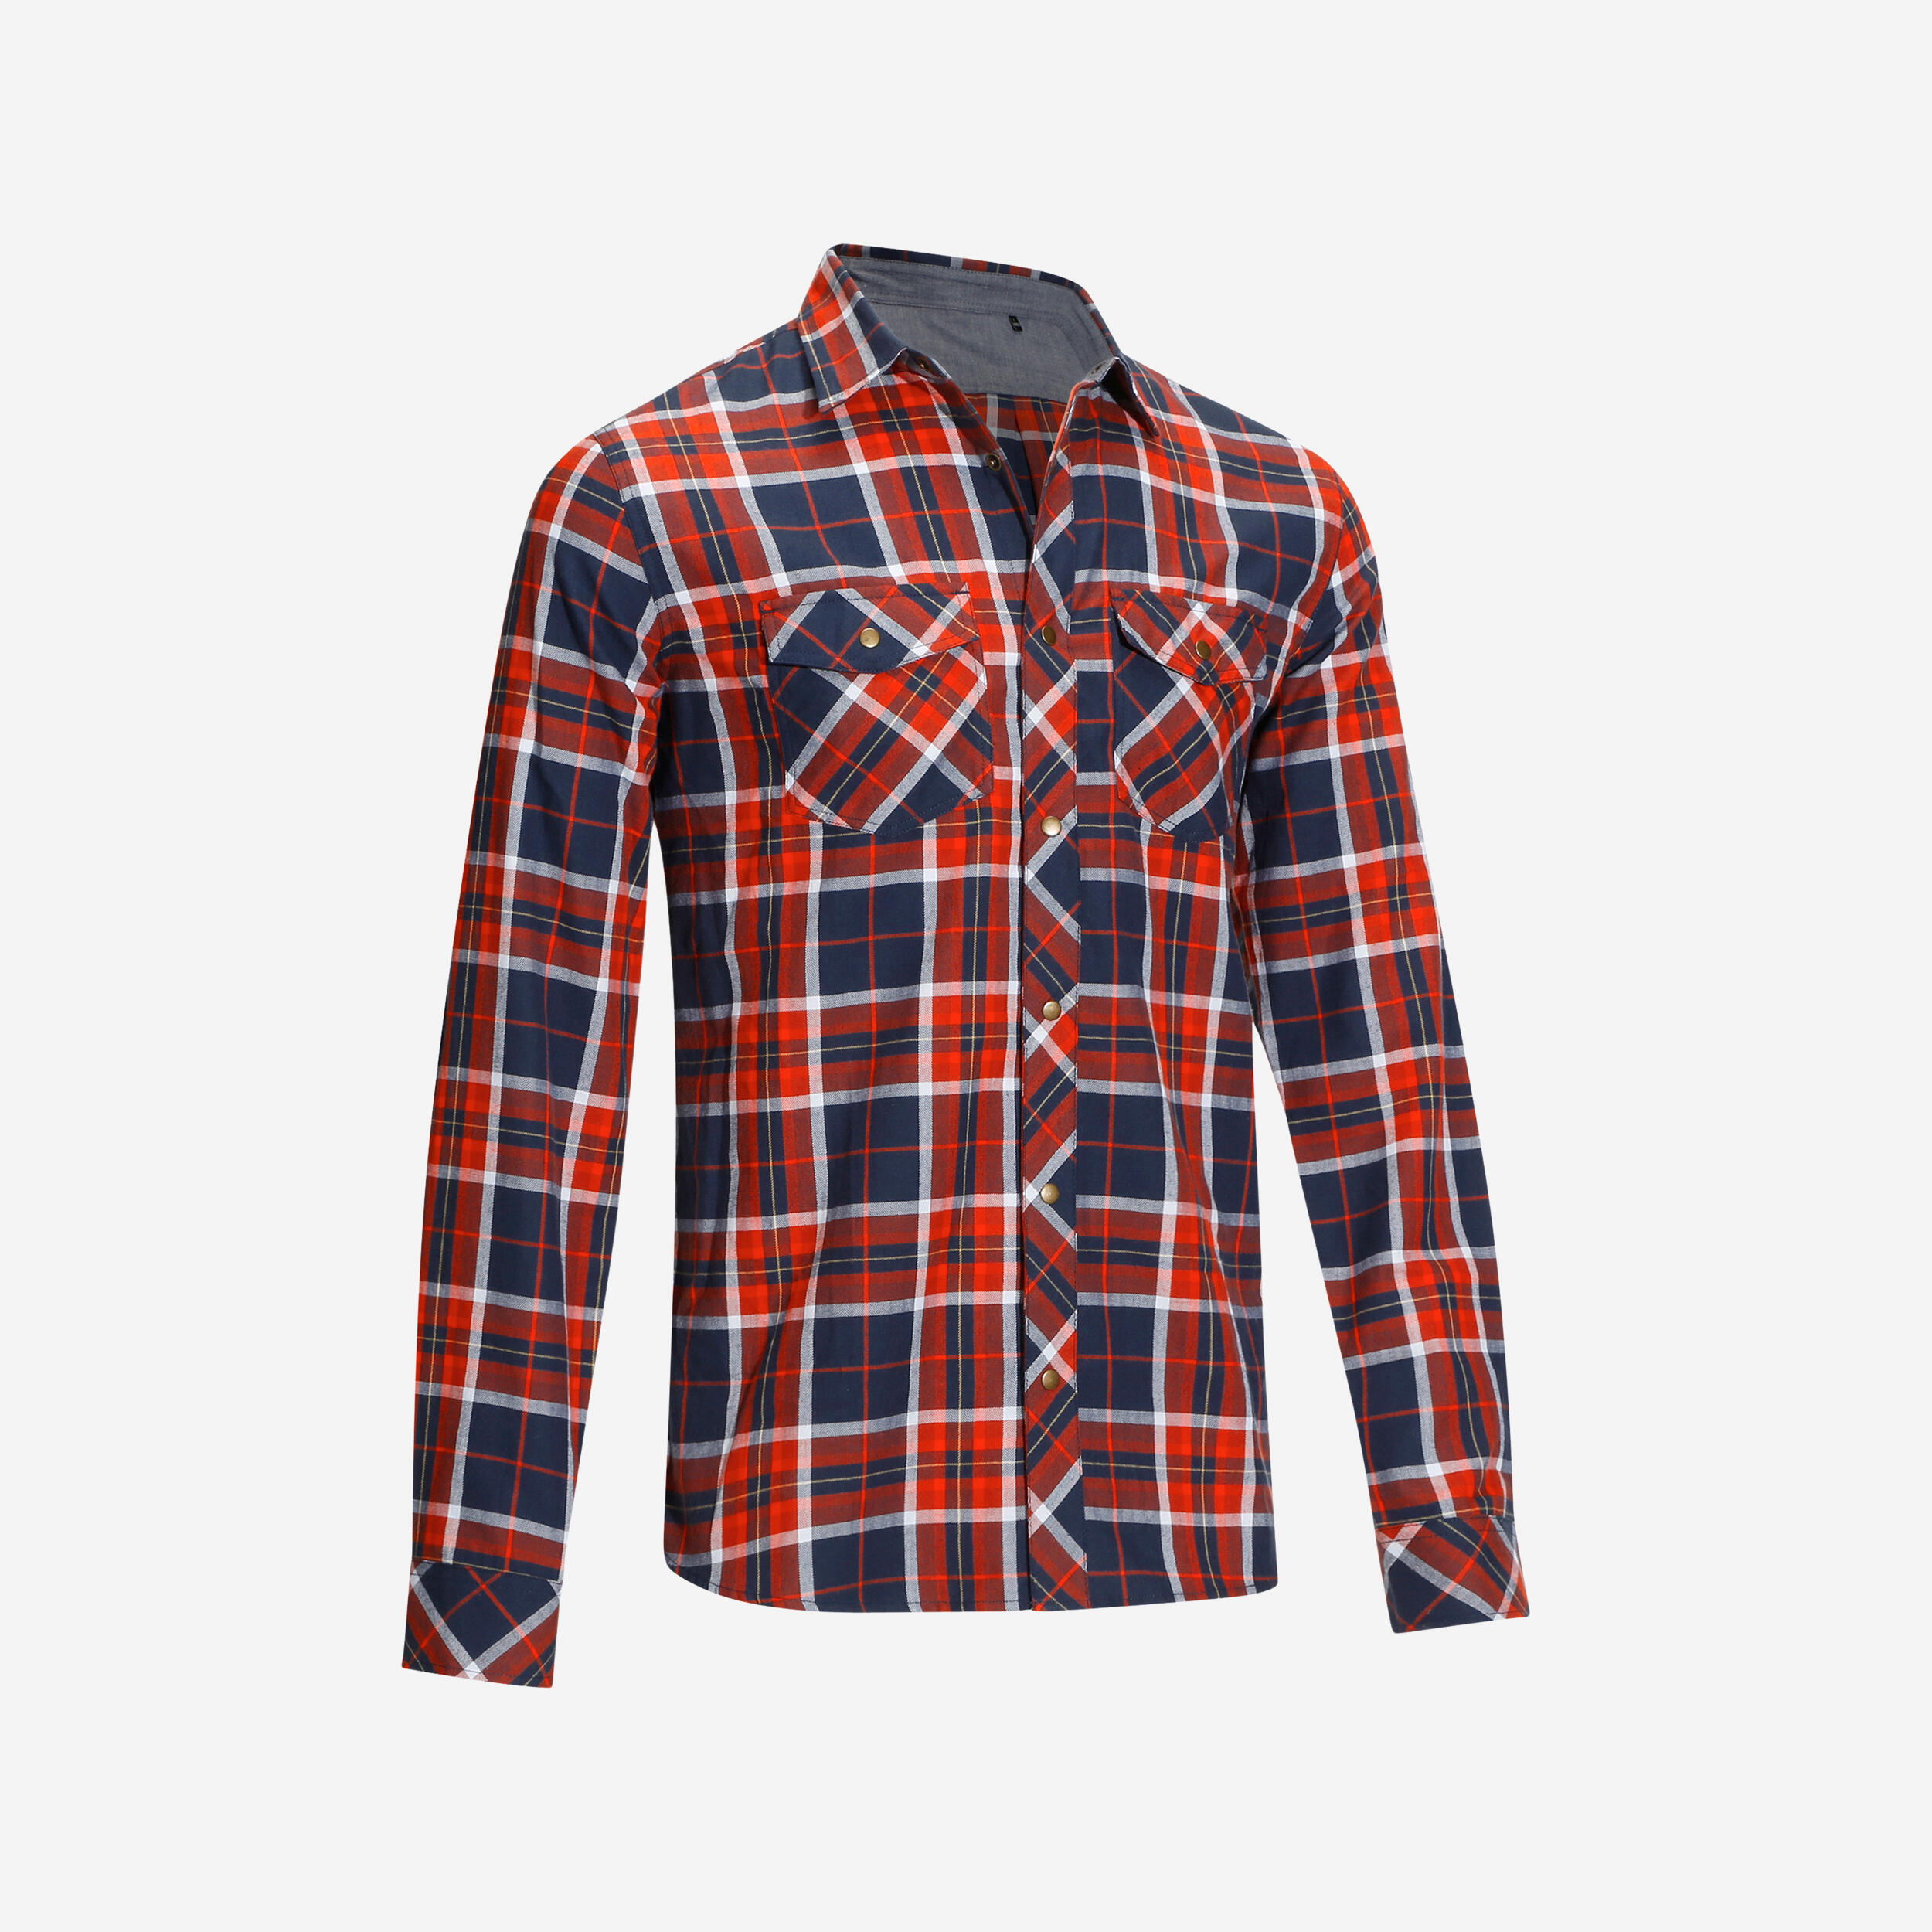 OKKSO Sentier Long-Sleeved Horse Riding Shirt - Navy and Red Checks